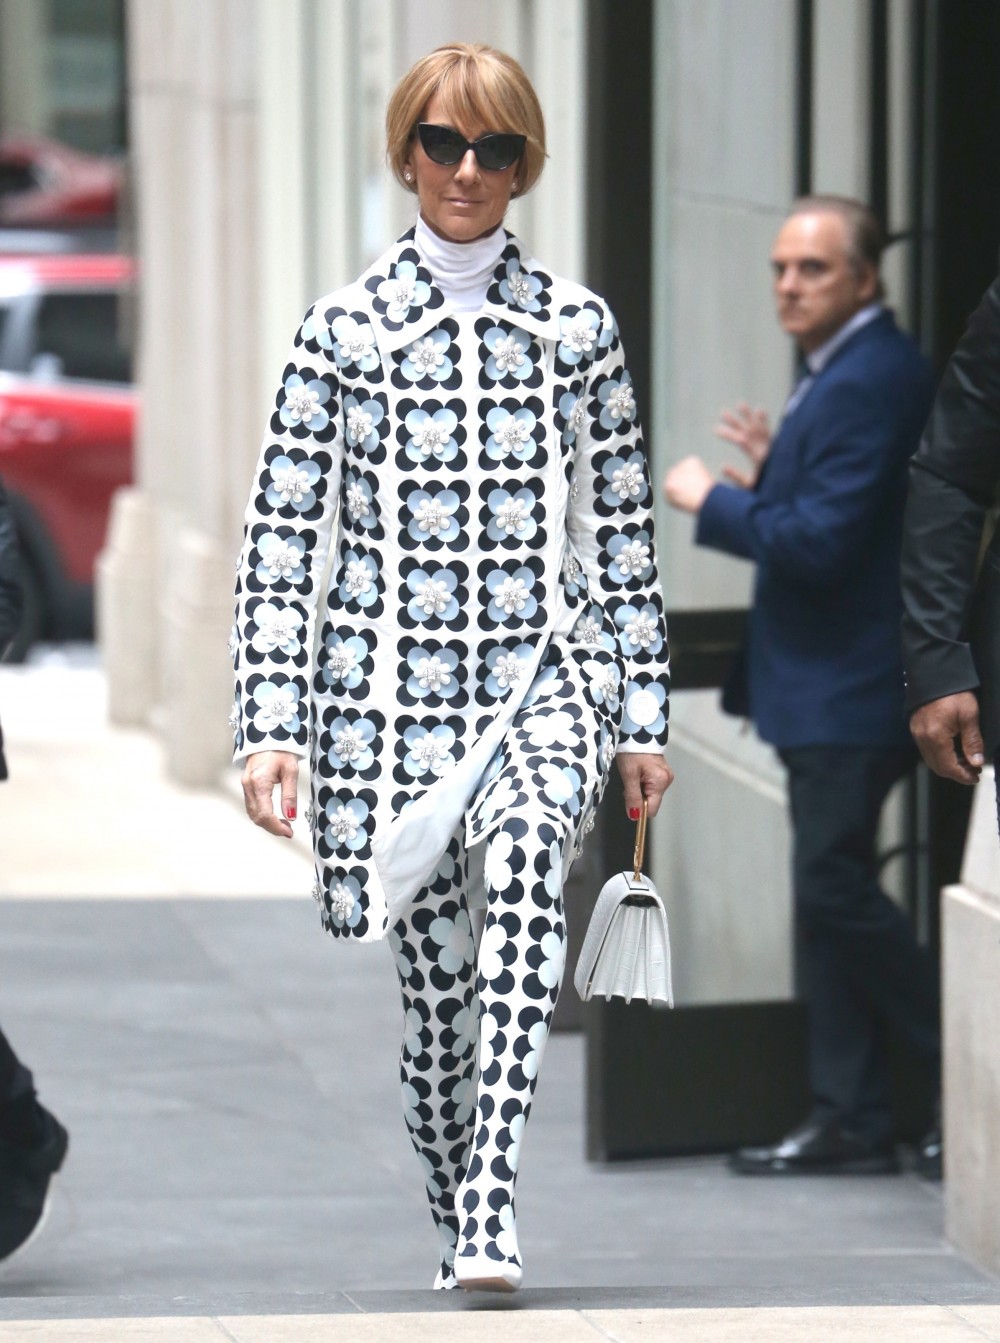 Celine Dion makes the sidewalk her runway with latest look!